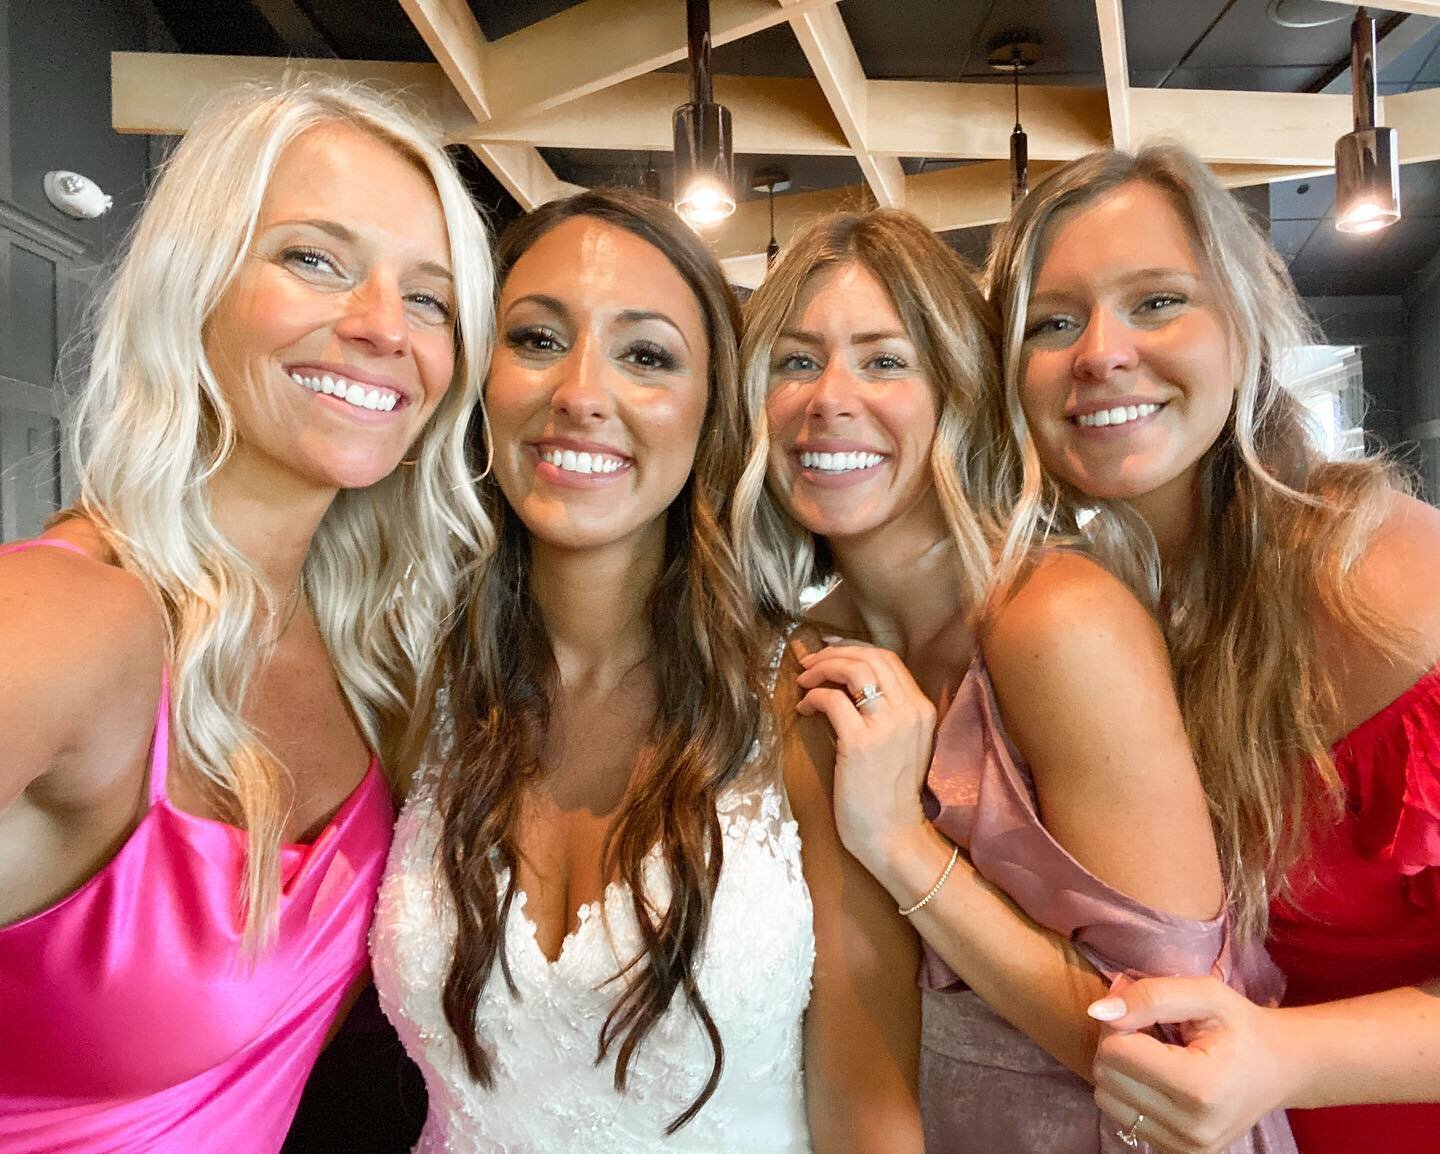 Started in our DMs now we here 😭
 
My favorite part of coaching. Connecting with the most incredible women I would have never known otherwise. Becoming more than just teammates, but lifelong friends. Celebrating beautiful milestones together, like @